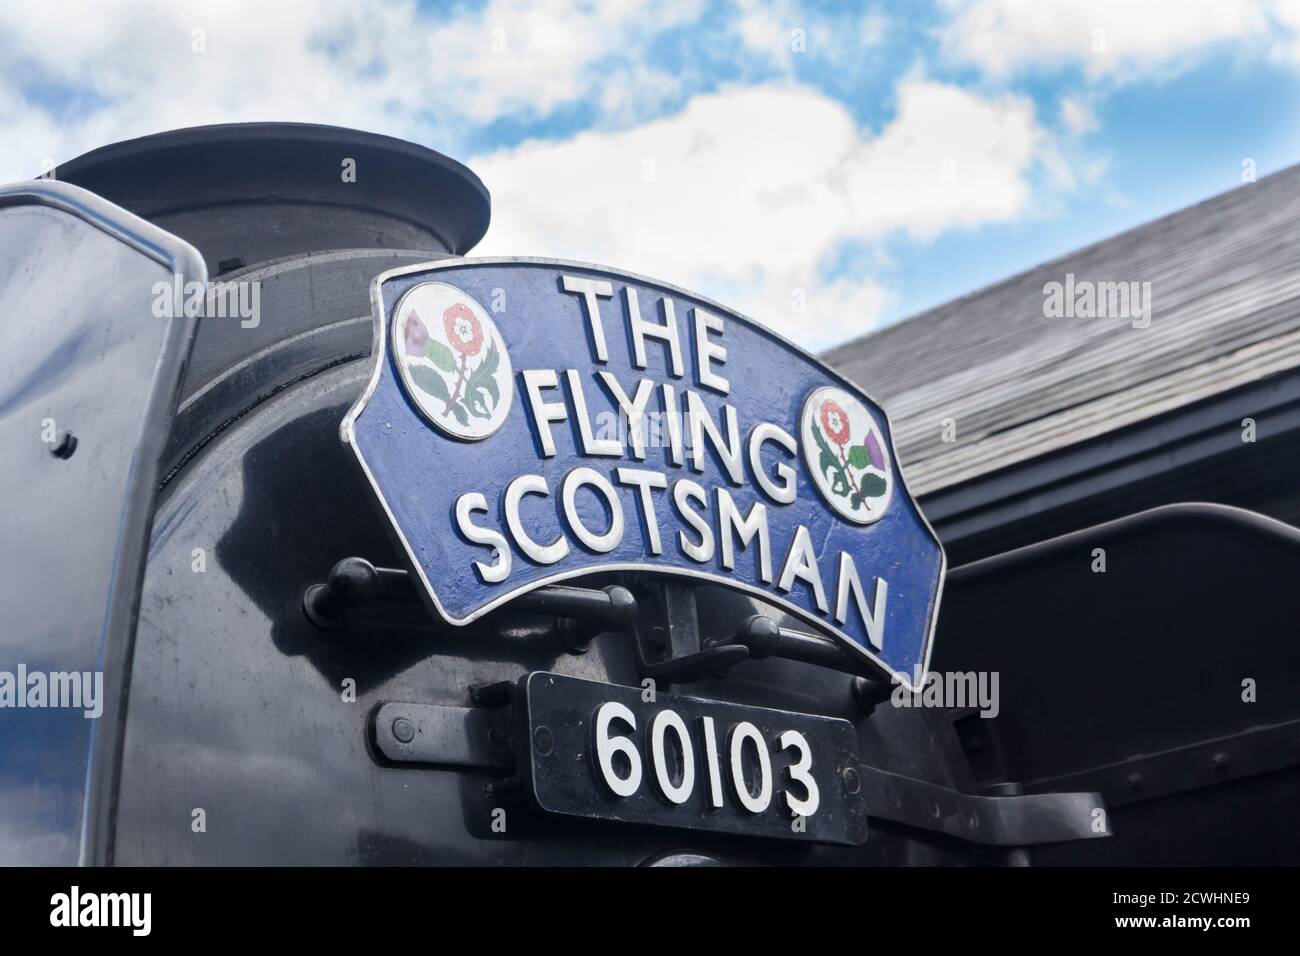 Train headboard of 'The Flying Scotsman', denoting the title of the named train, carried on the smokebox door of the steam locomotive Flying Scotsman. Stock Photo